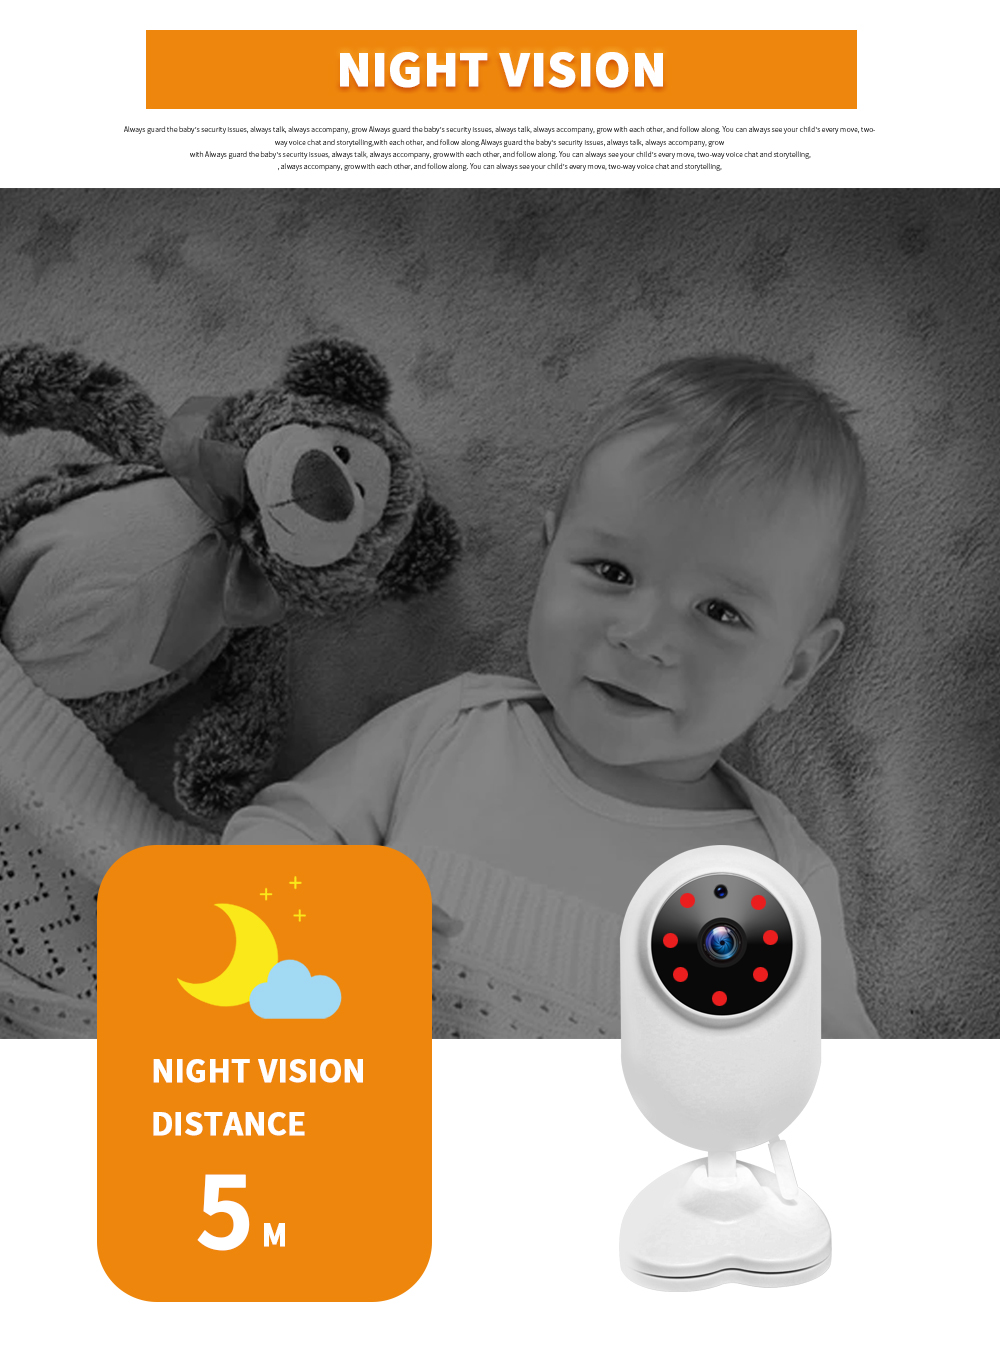 1080P 4.3 inch Screen Wireless Video Nanny Baby Monitor With Camera Security 2MP Babyfoon Temperature Monitor Night Vision